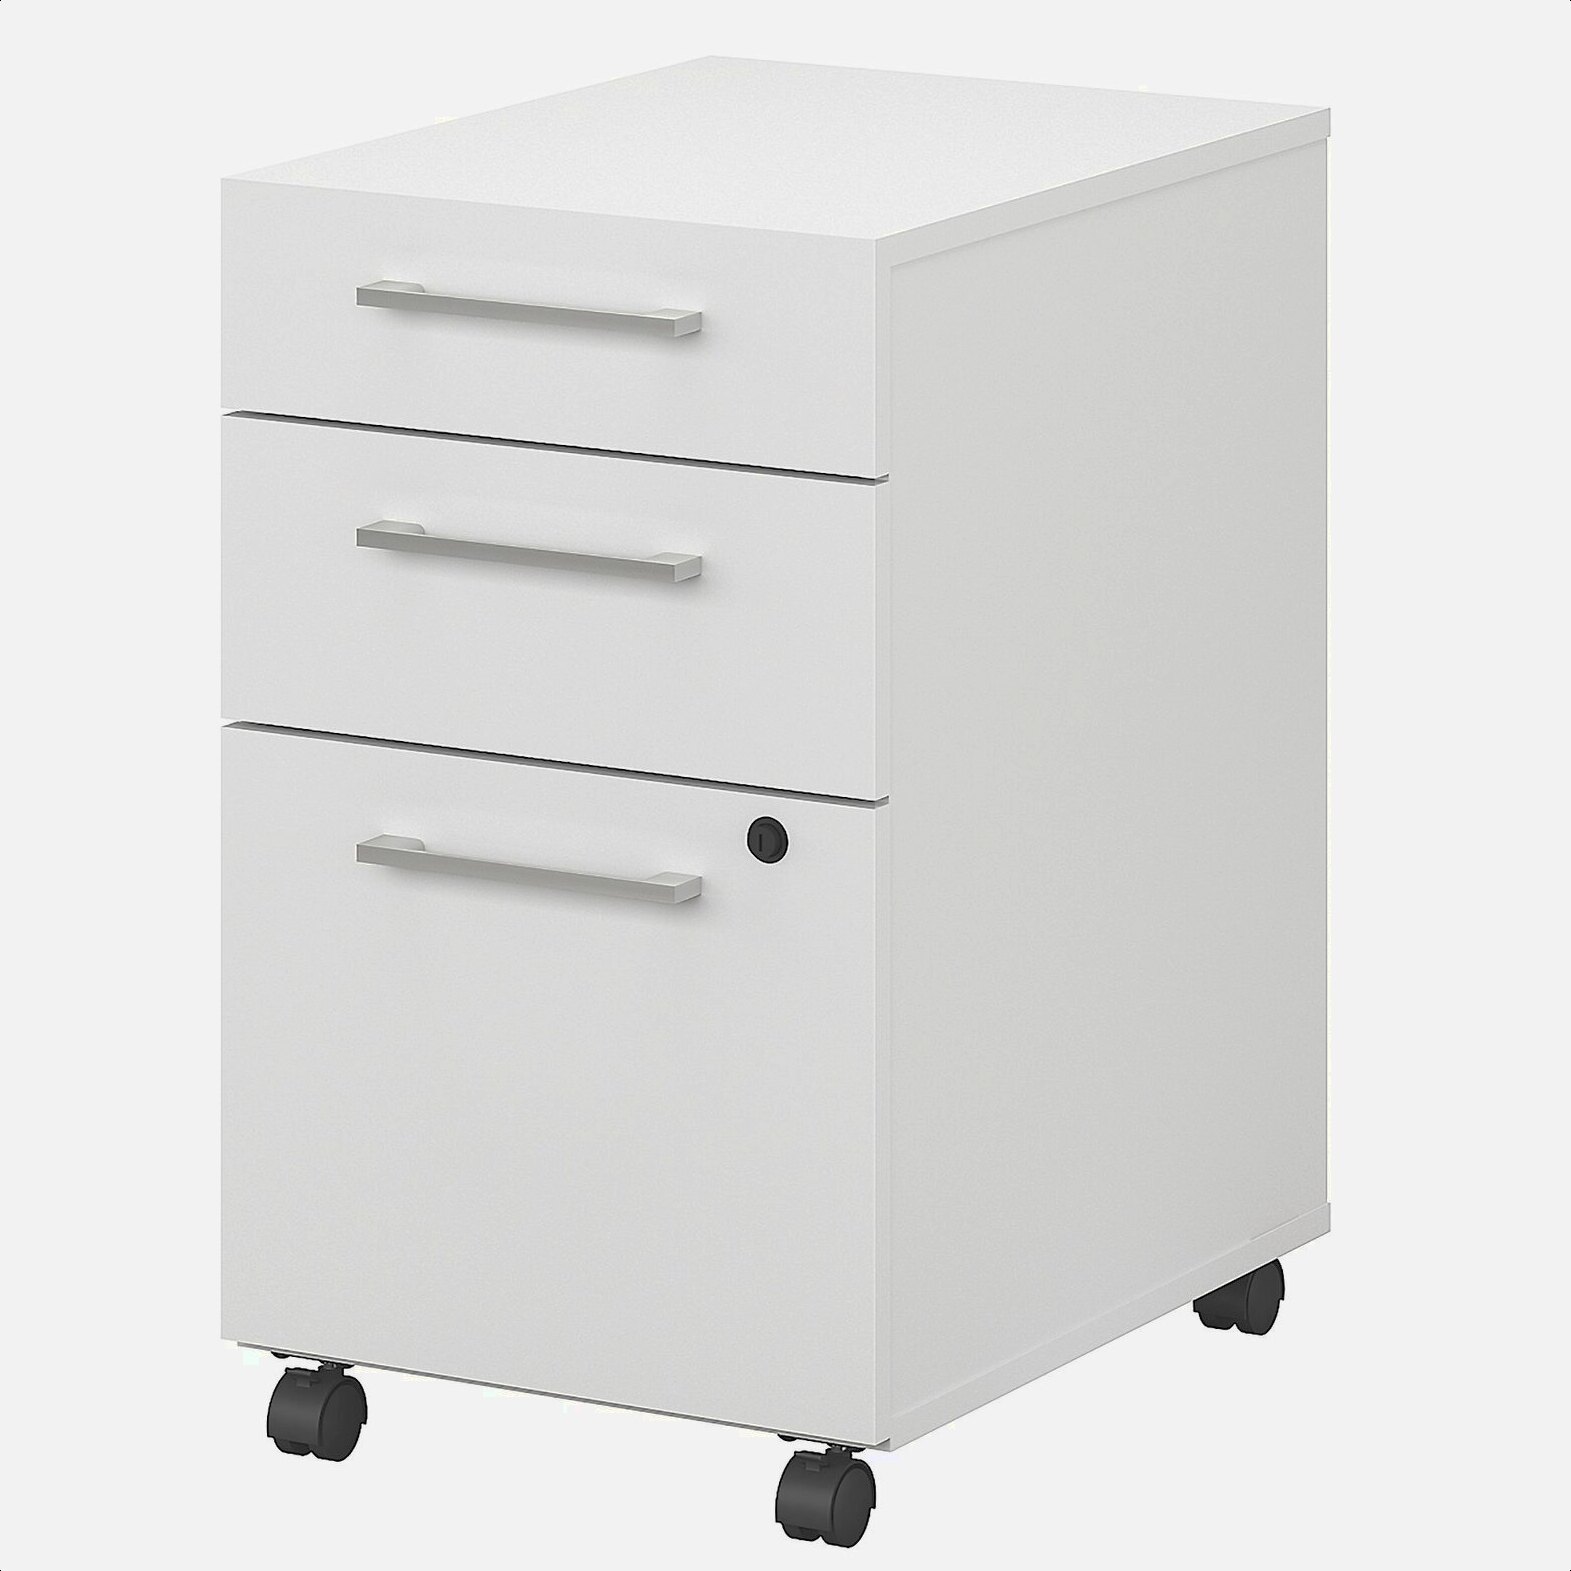 Milanhome 400 Series 3-Drawer Mobile Vertical Filing Cabinet - image 1 of 5